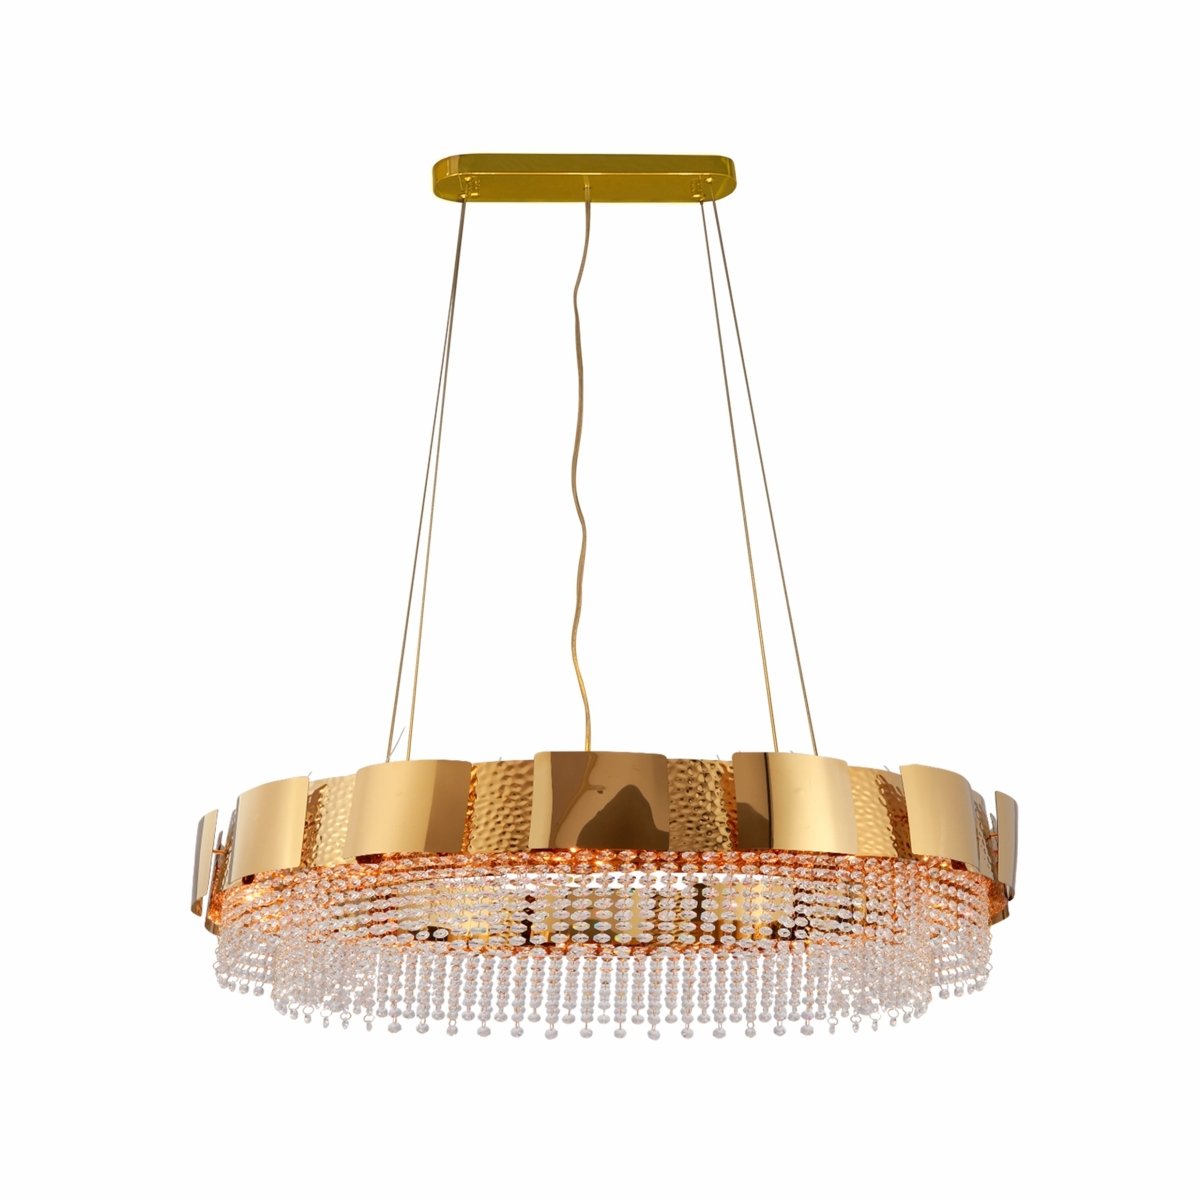 Main image of Octagon Crystal Gold Metal Island Chandelier 900x300mm with 8xE14 Fitting | TEKLED 156-19582